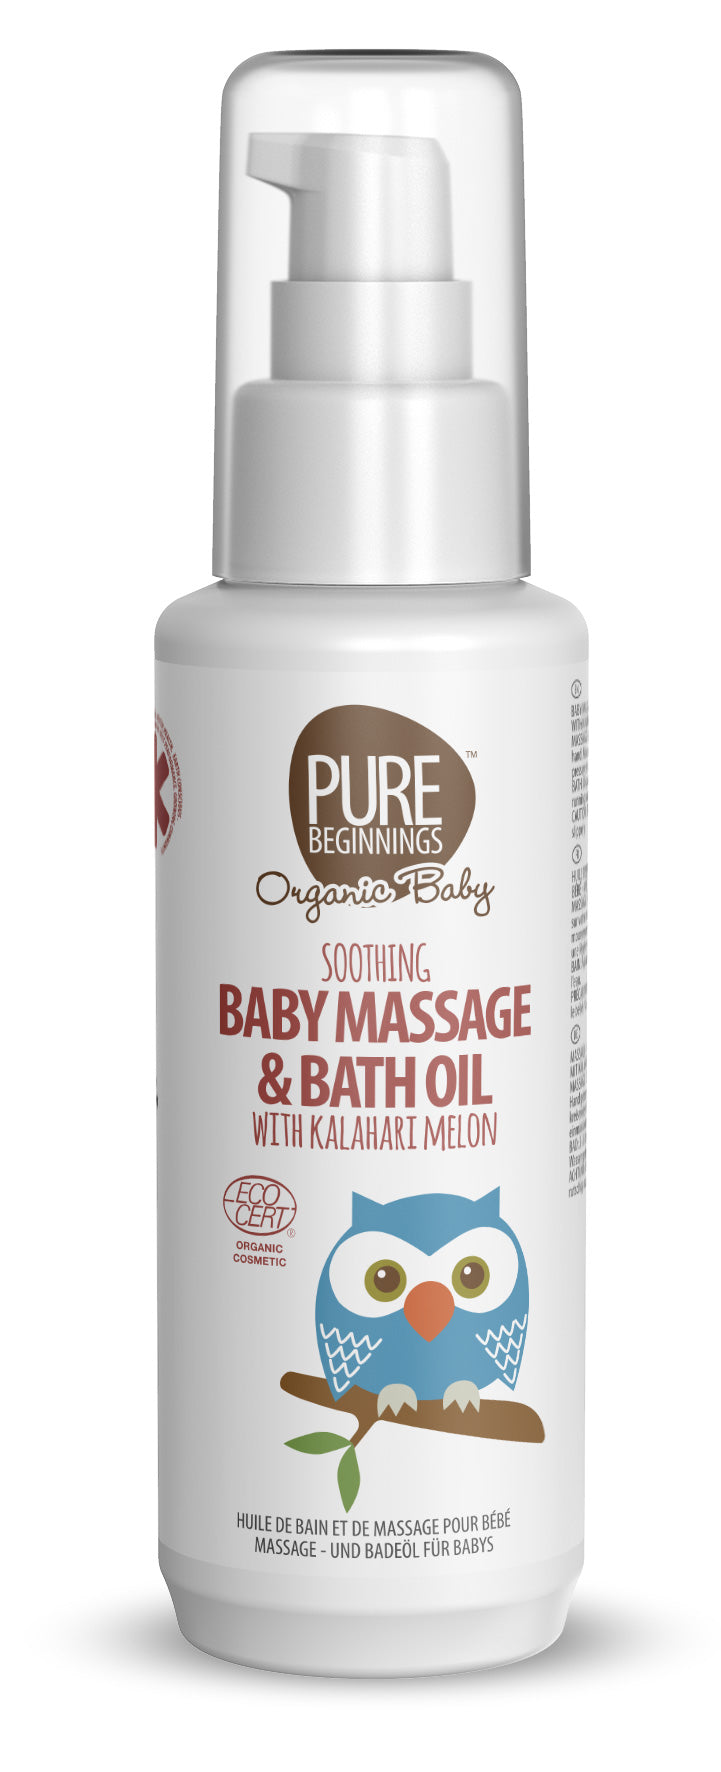 Pure Beginnings Soothing Baby Massage and Bath Oil with Kalahari Melon	100ml with Calming Oils